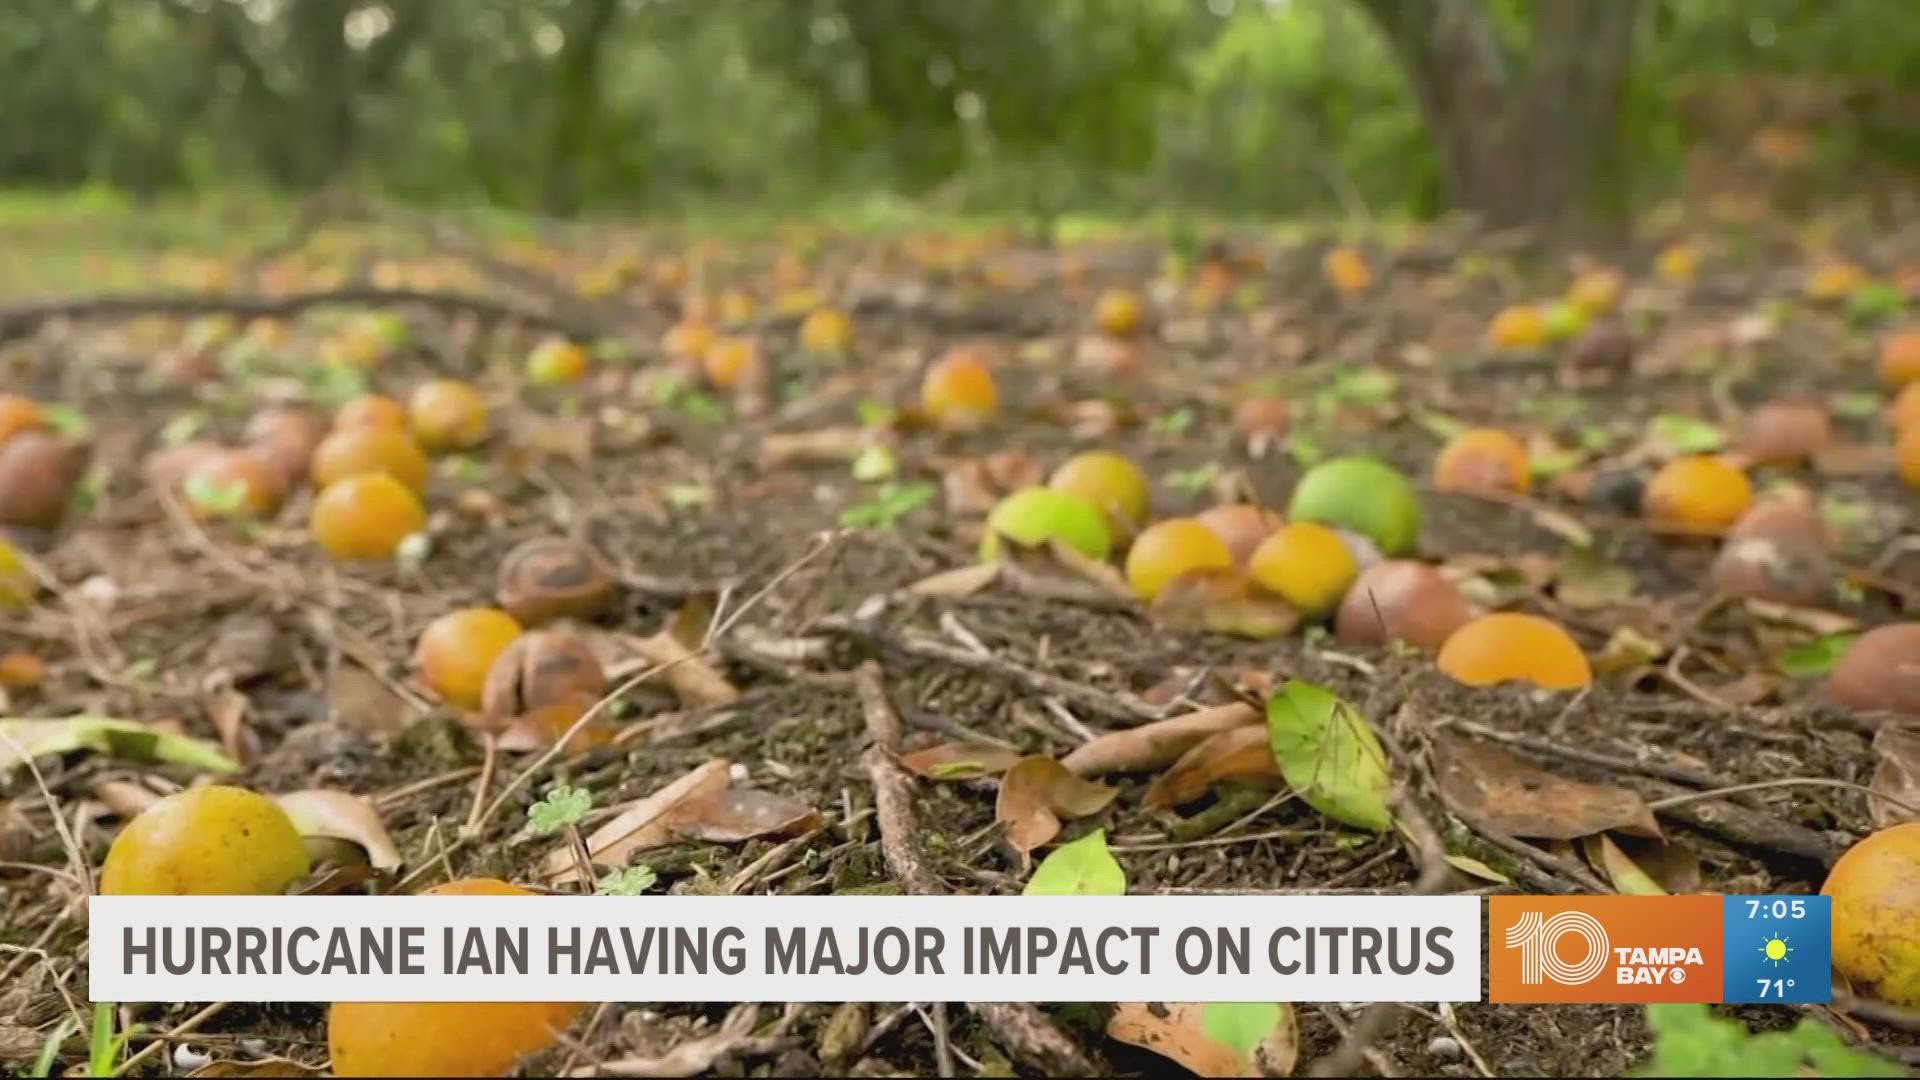 The orange forecast for this year, released Wednesday, puts production at about 28 million boxes, or 1.26 million tons, according to the U.S. Agriculture Department.